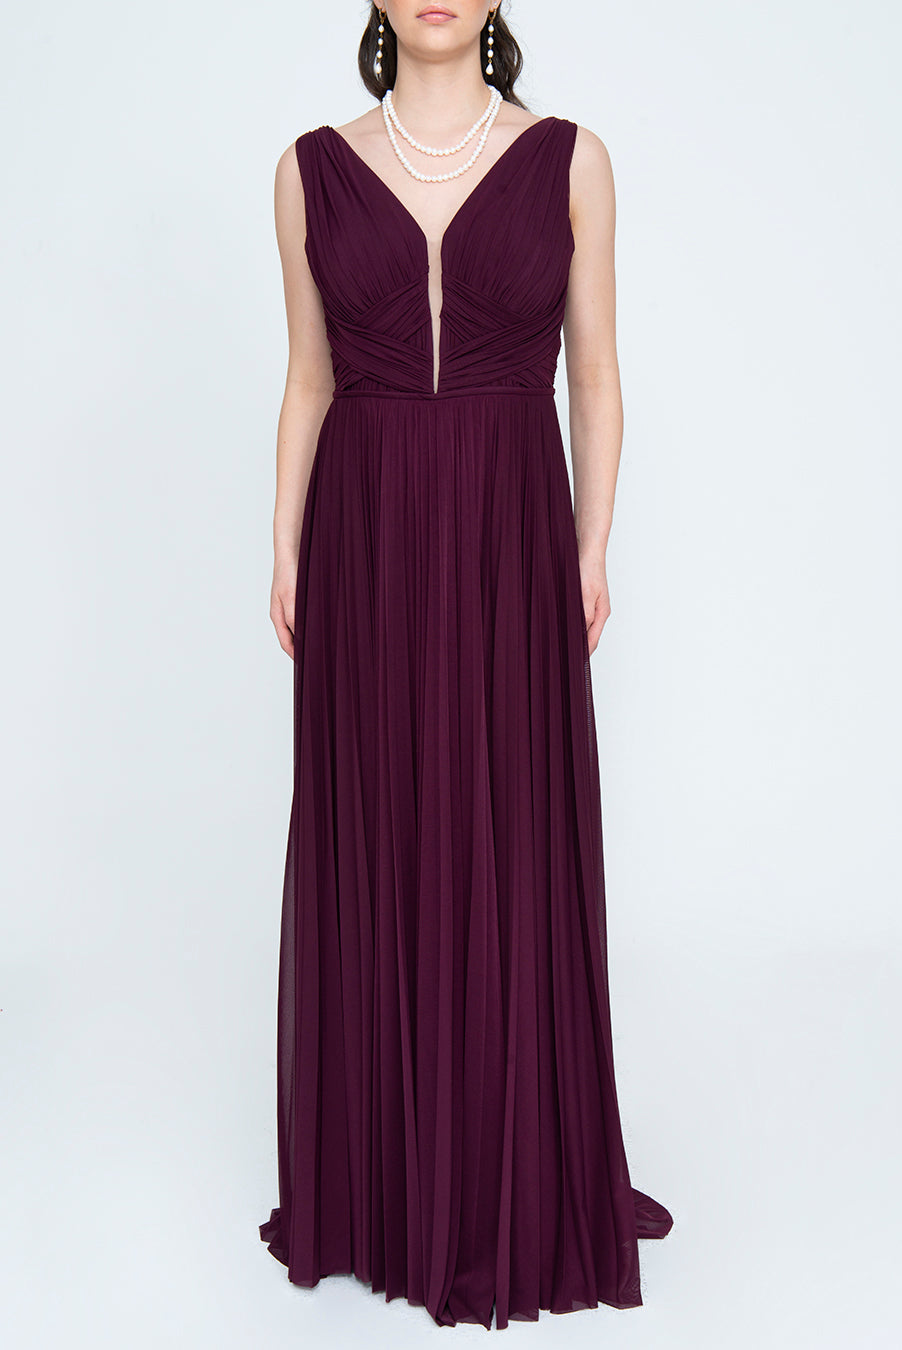 Rosa - Mystic Evenings | Evening and Prom Dresses